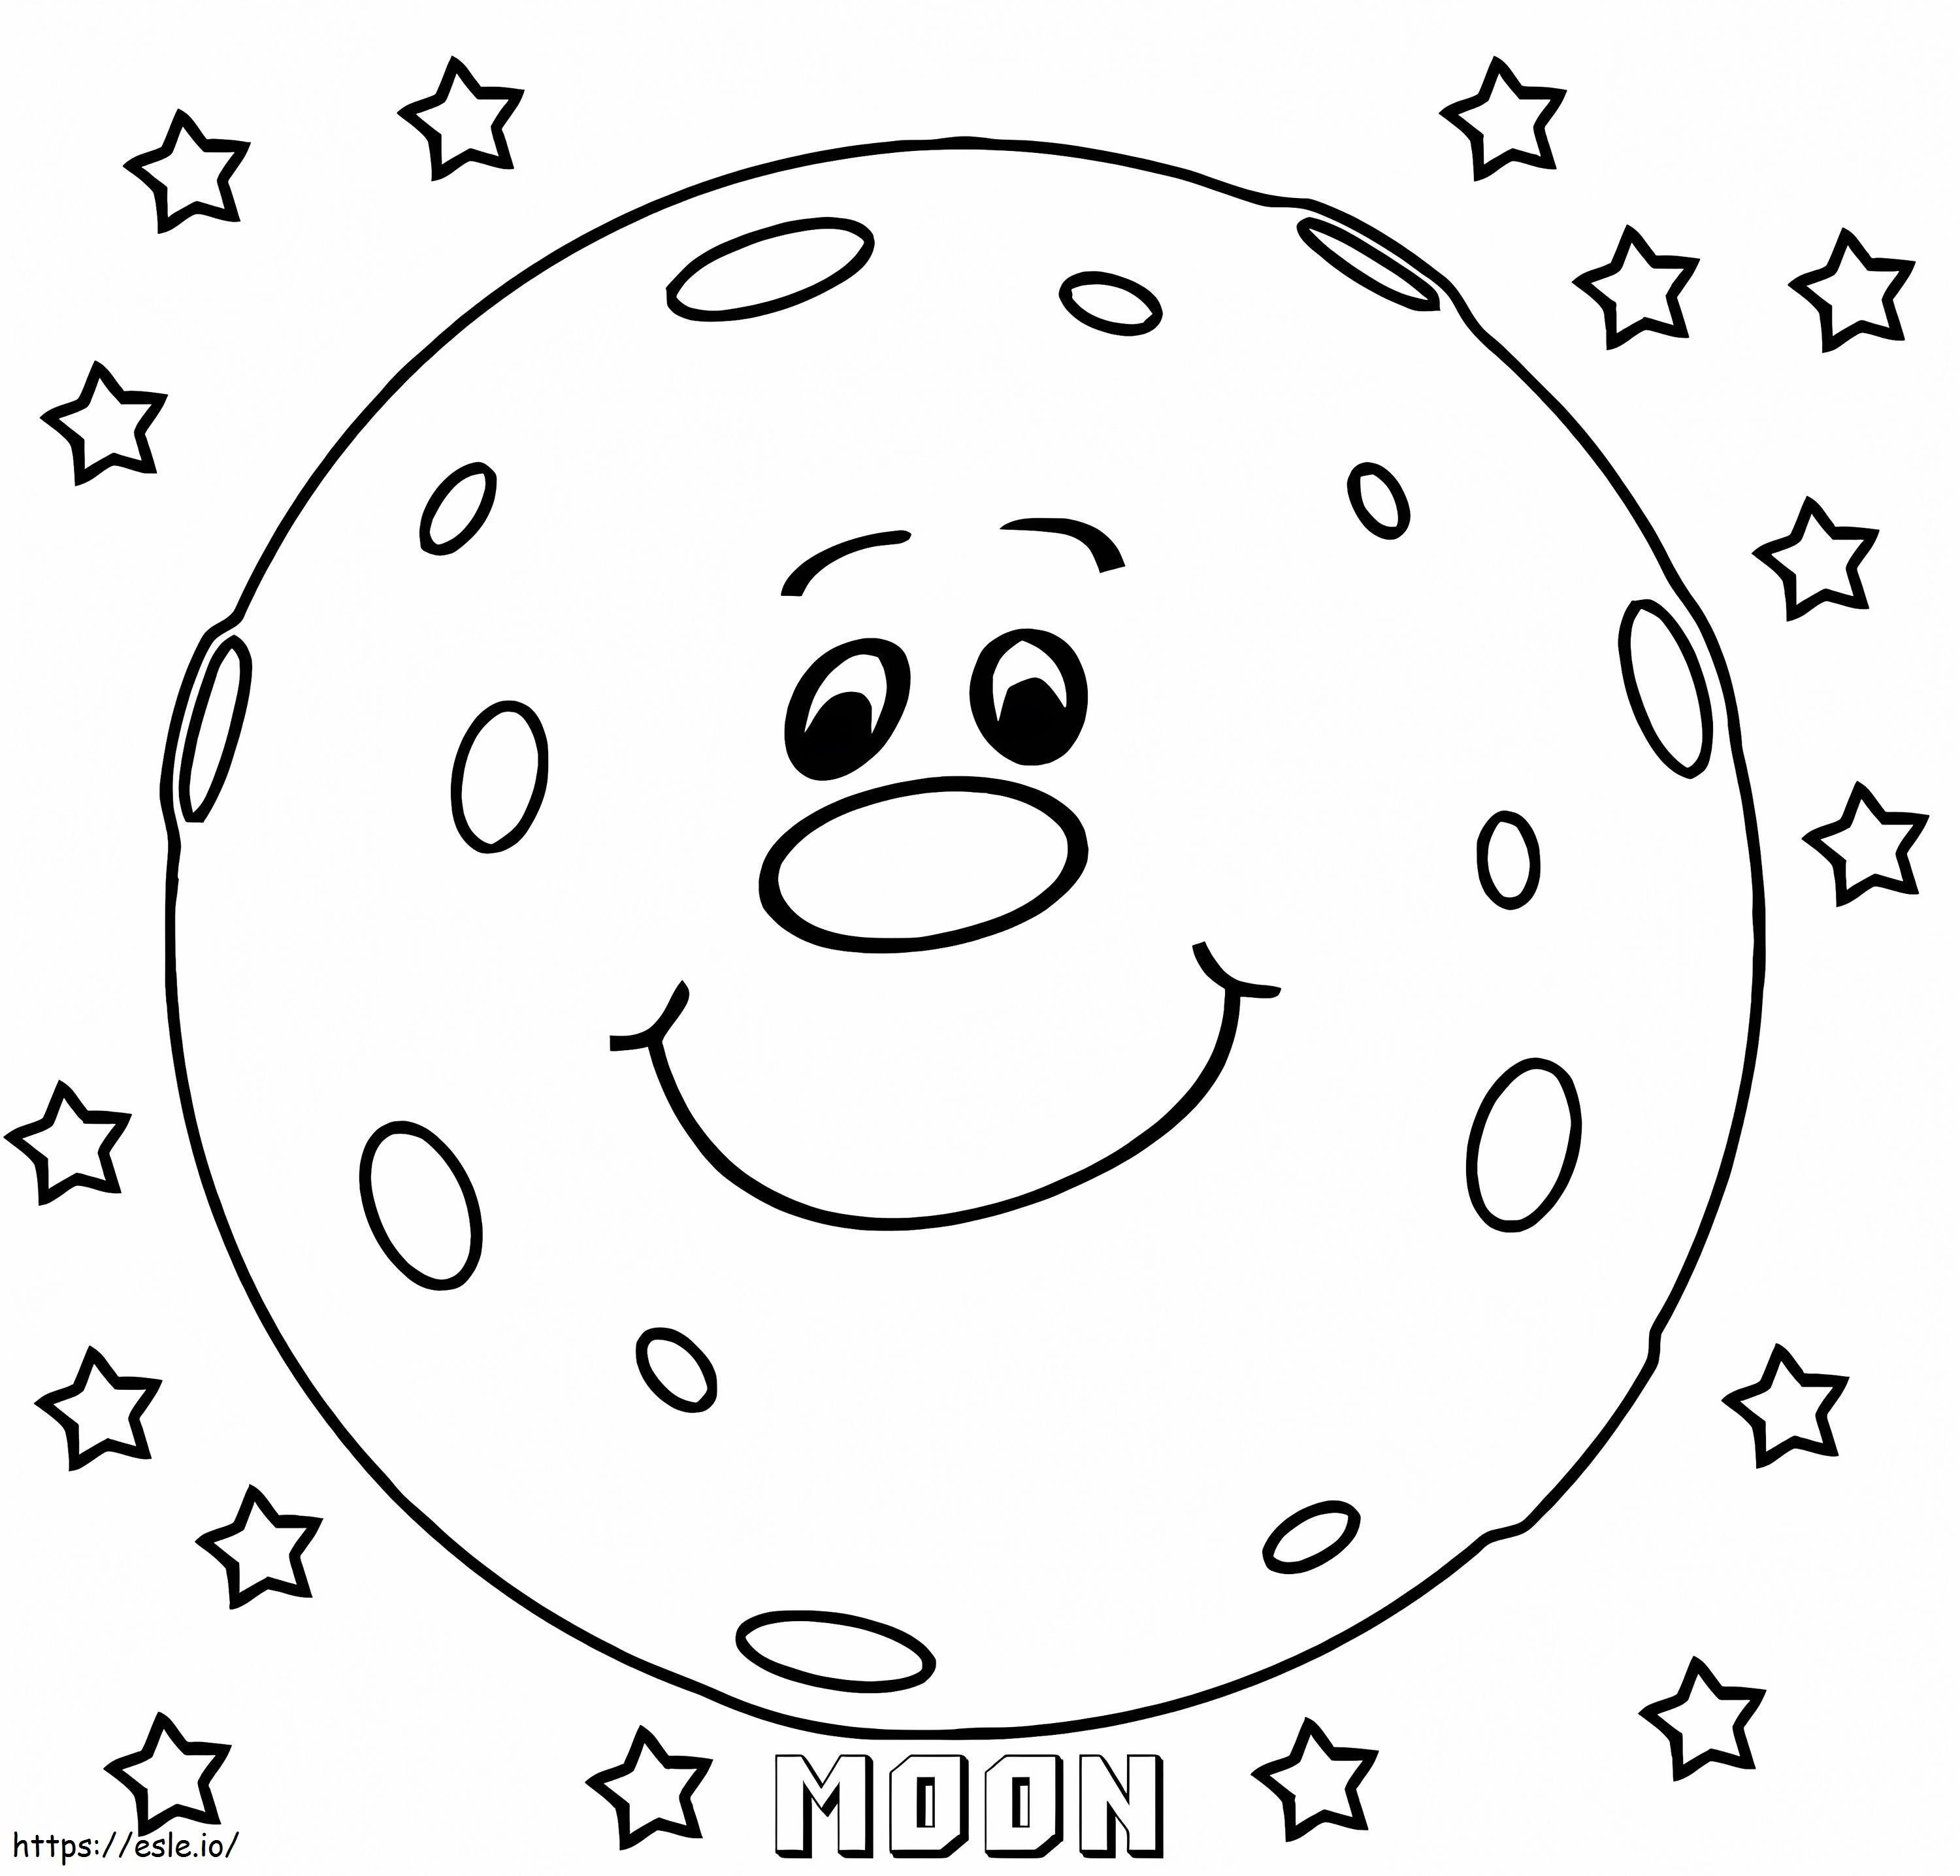 Smiling Moon With Stars coloring page